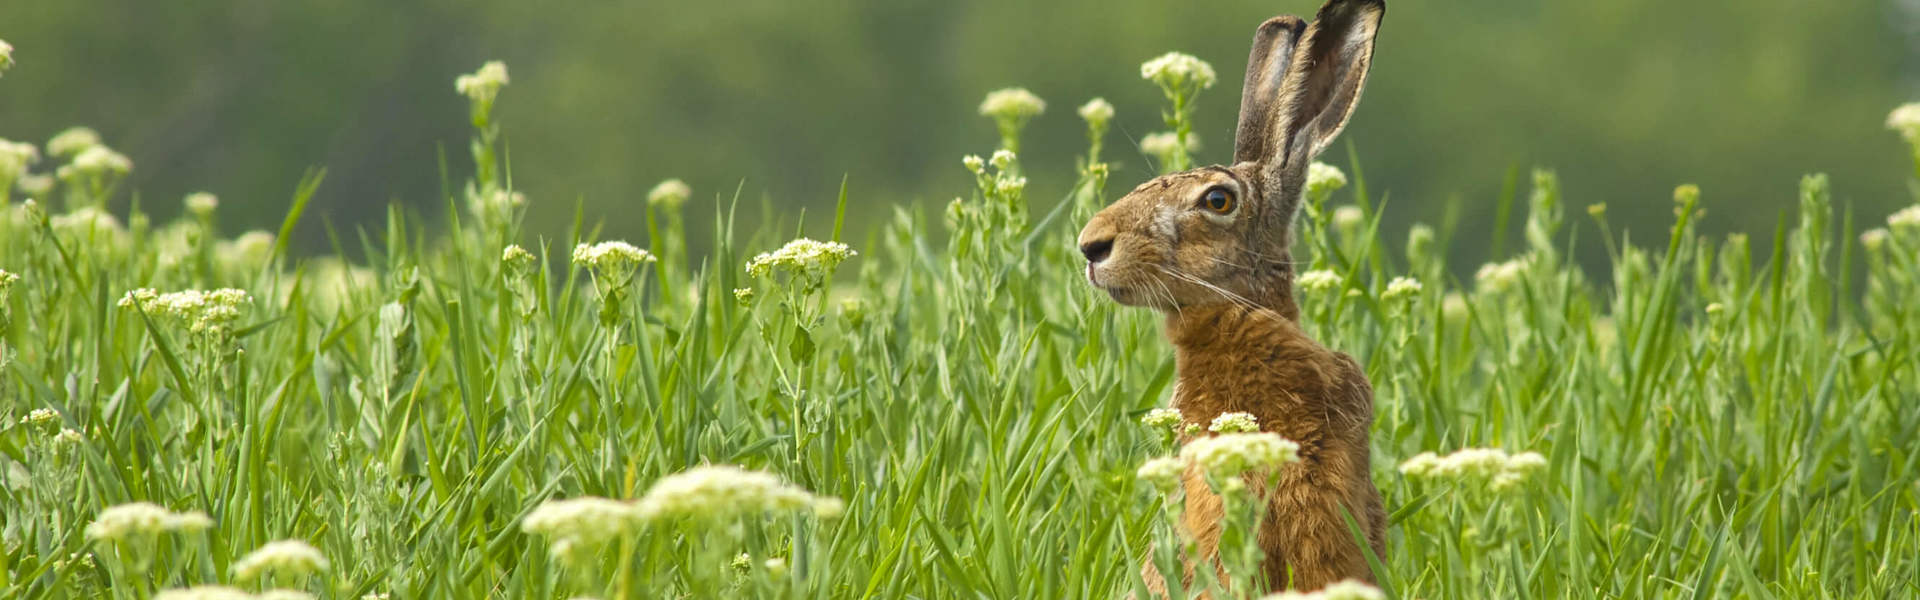 a hare looking over some grass